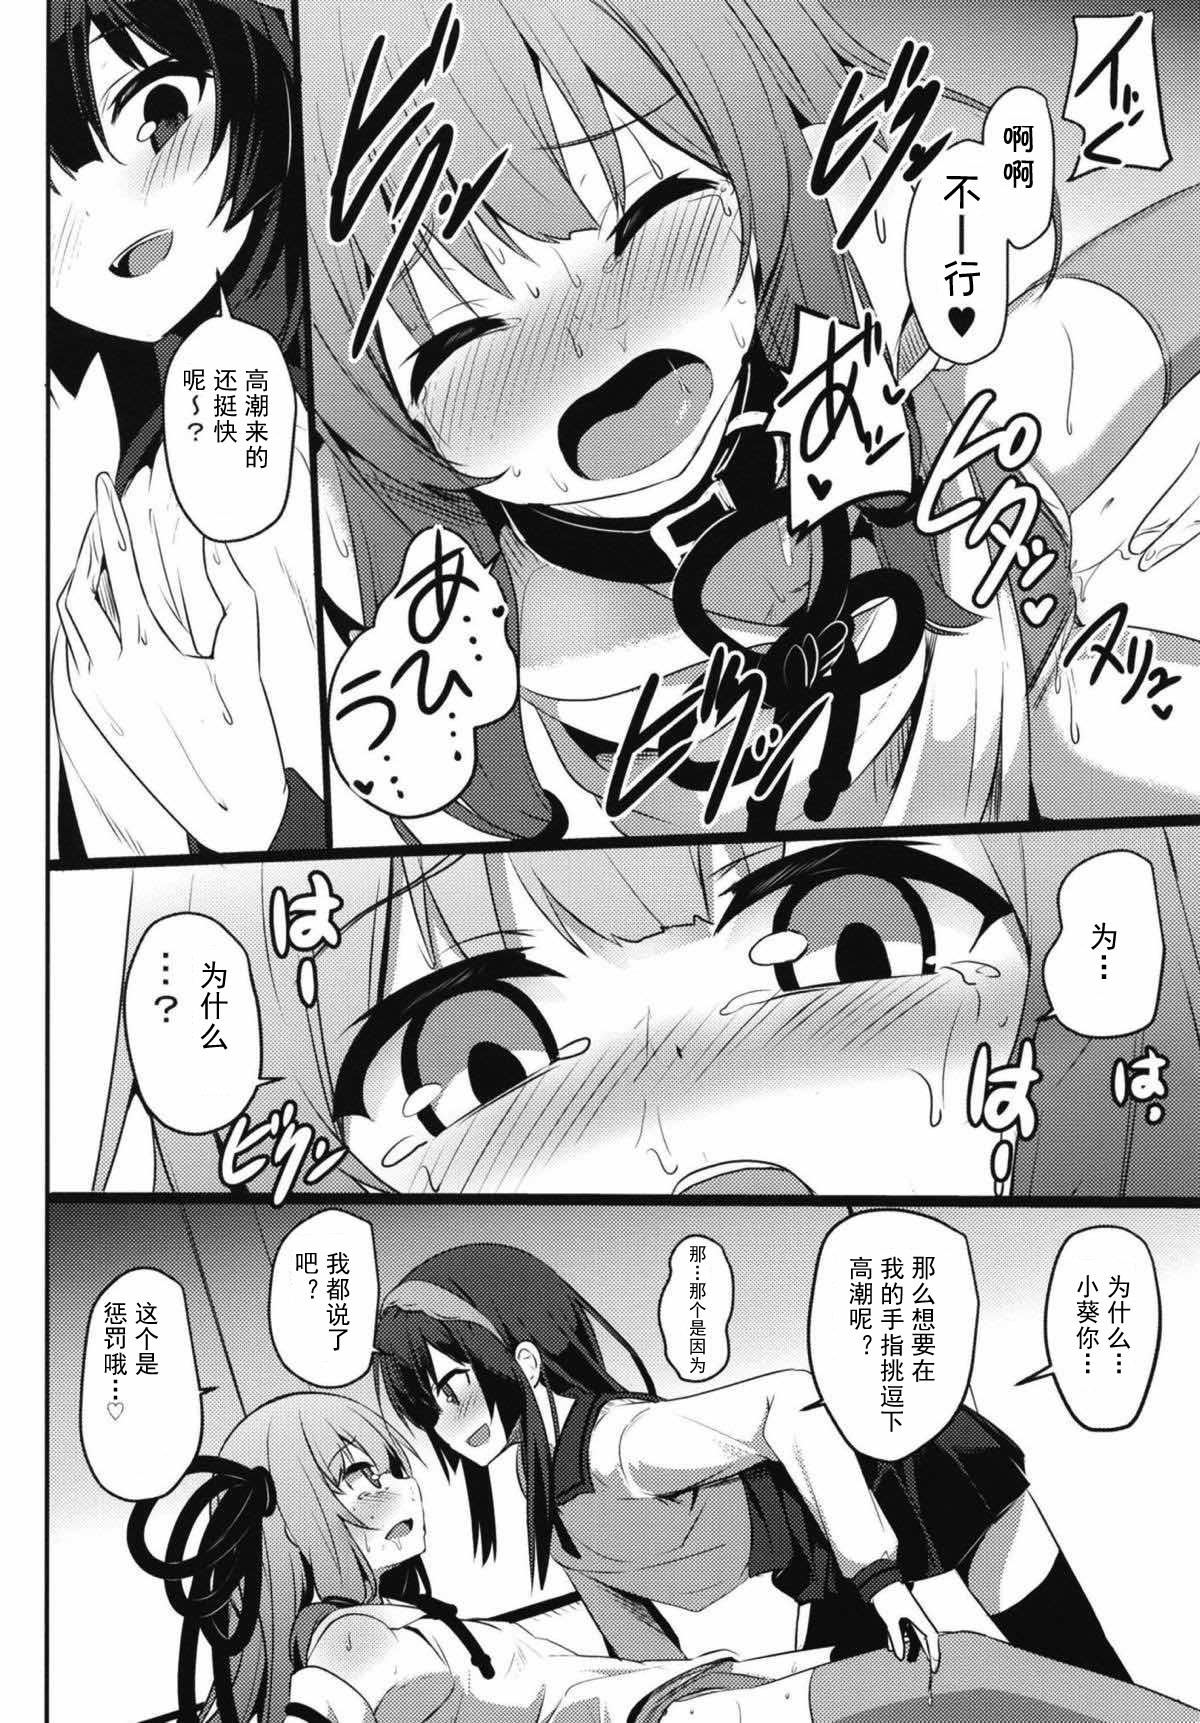 Indian (Kotonoha's Festa 2) [Milk Pudding (Jamcy)] Akane-chan Challenge! 2.5-kaime (VOICEROID) [Chinese] [古早个人汉化] - Voiceroid Hot Naked Women - Page 10